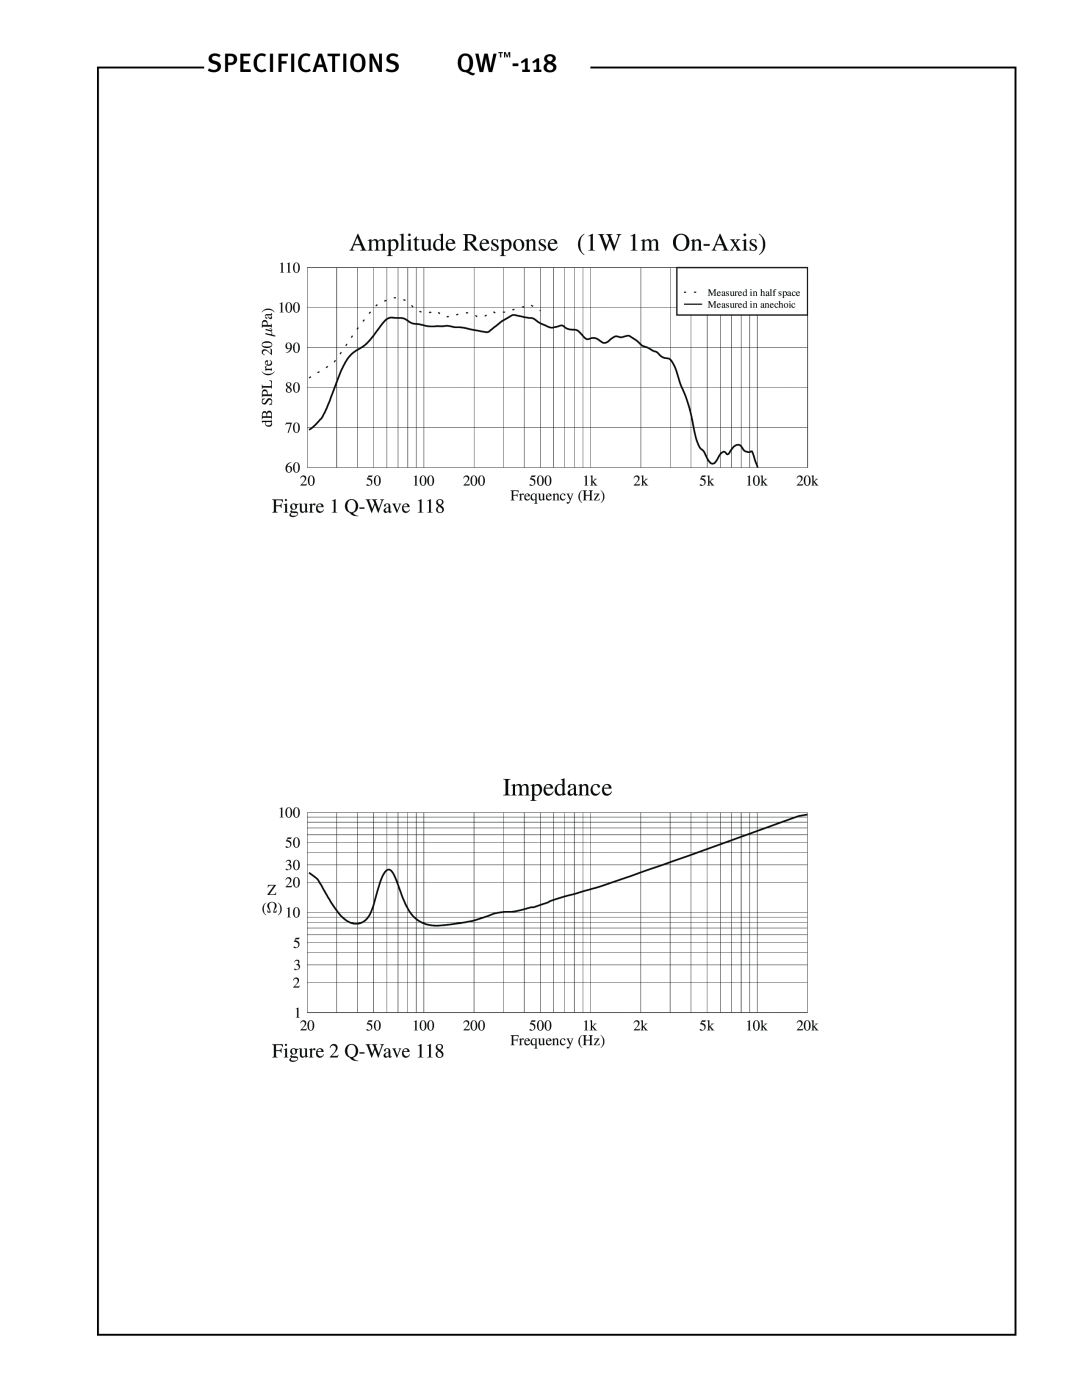 Peavey QW-118 specifications Amplitude Response, 1W 1m On-Axis, Impedance, Q-Wave118, Specifications 